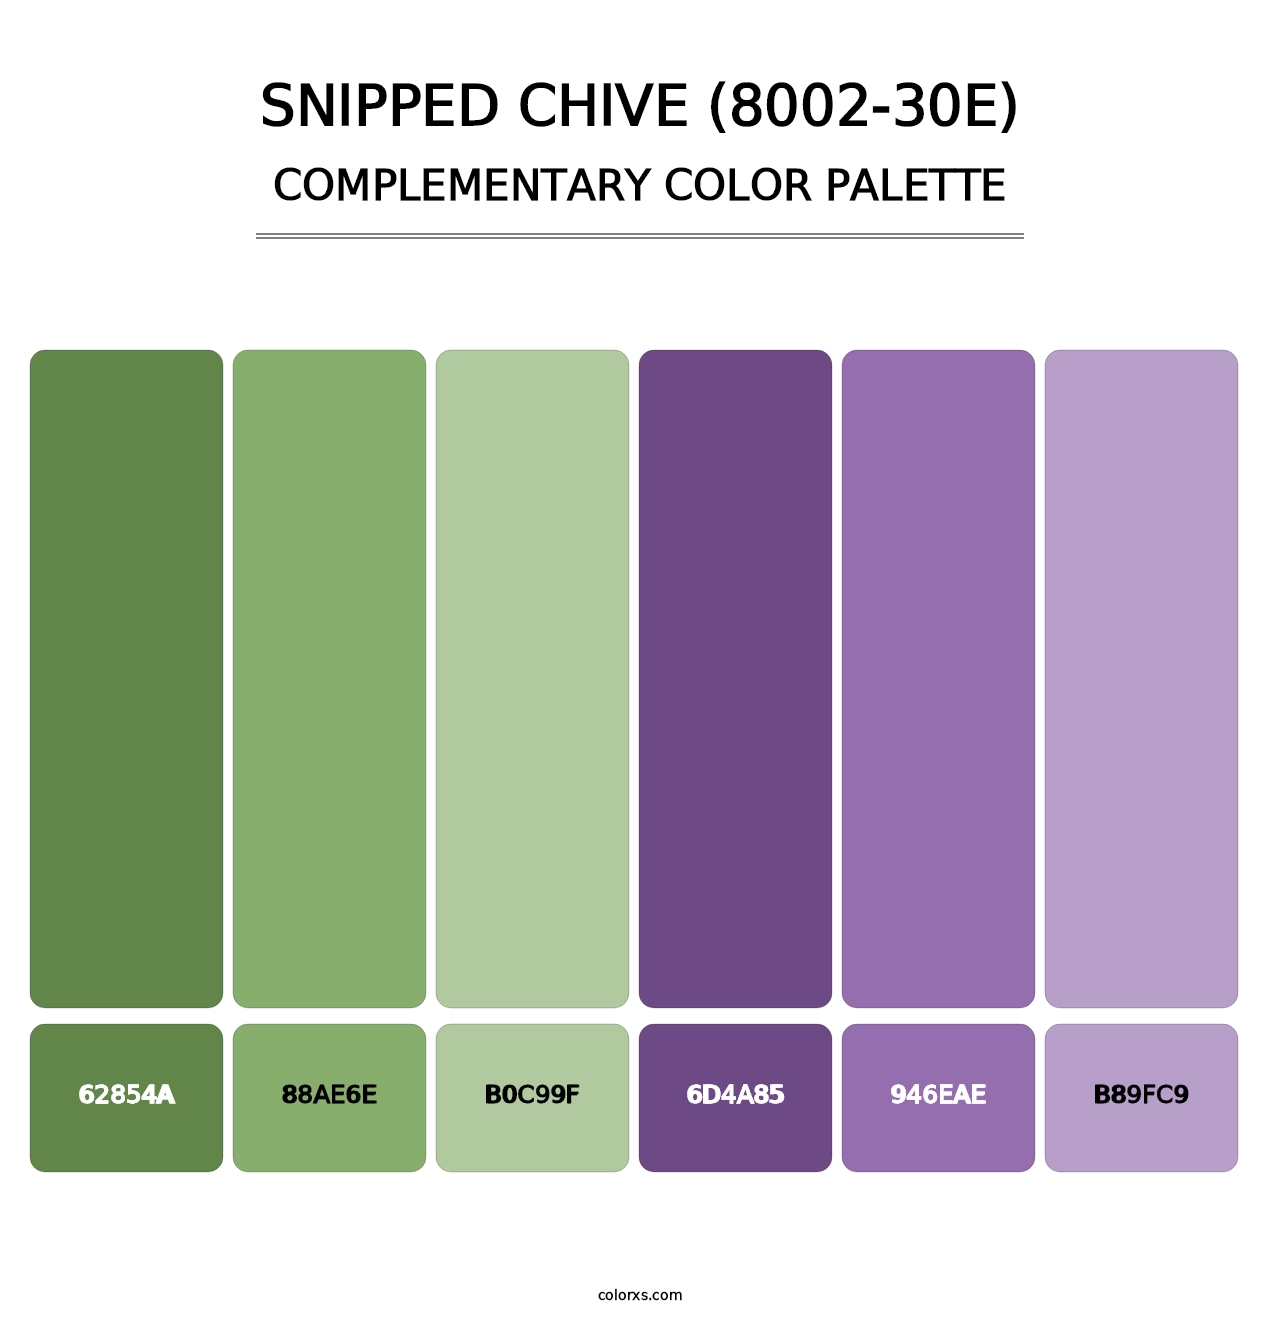 Snipped Chive (8002-30E) - Complementary Color Palette